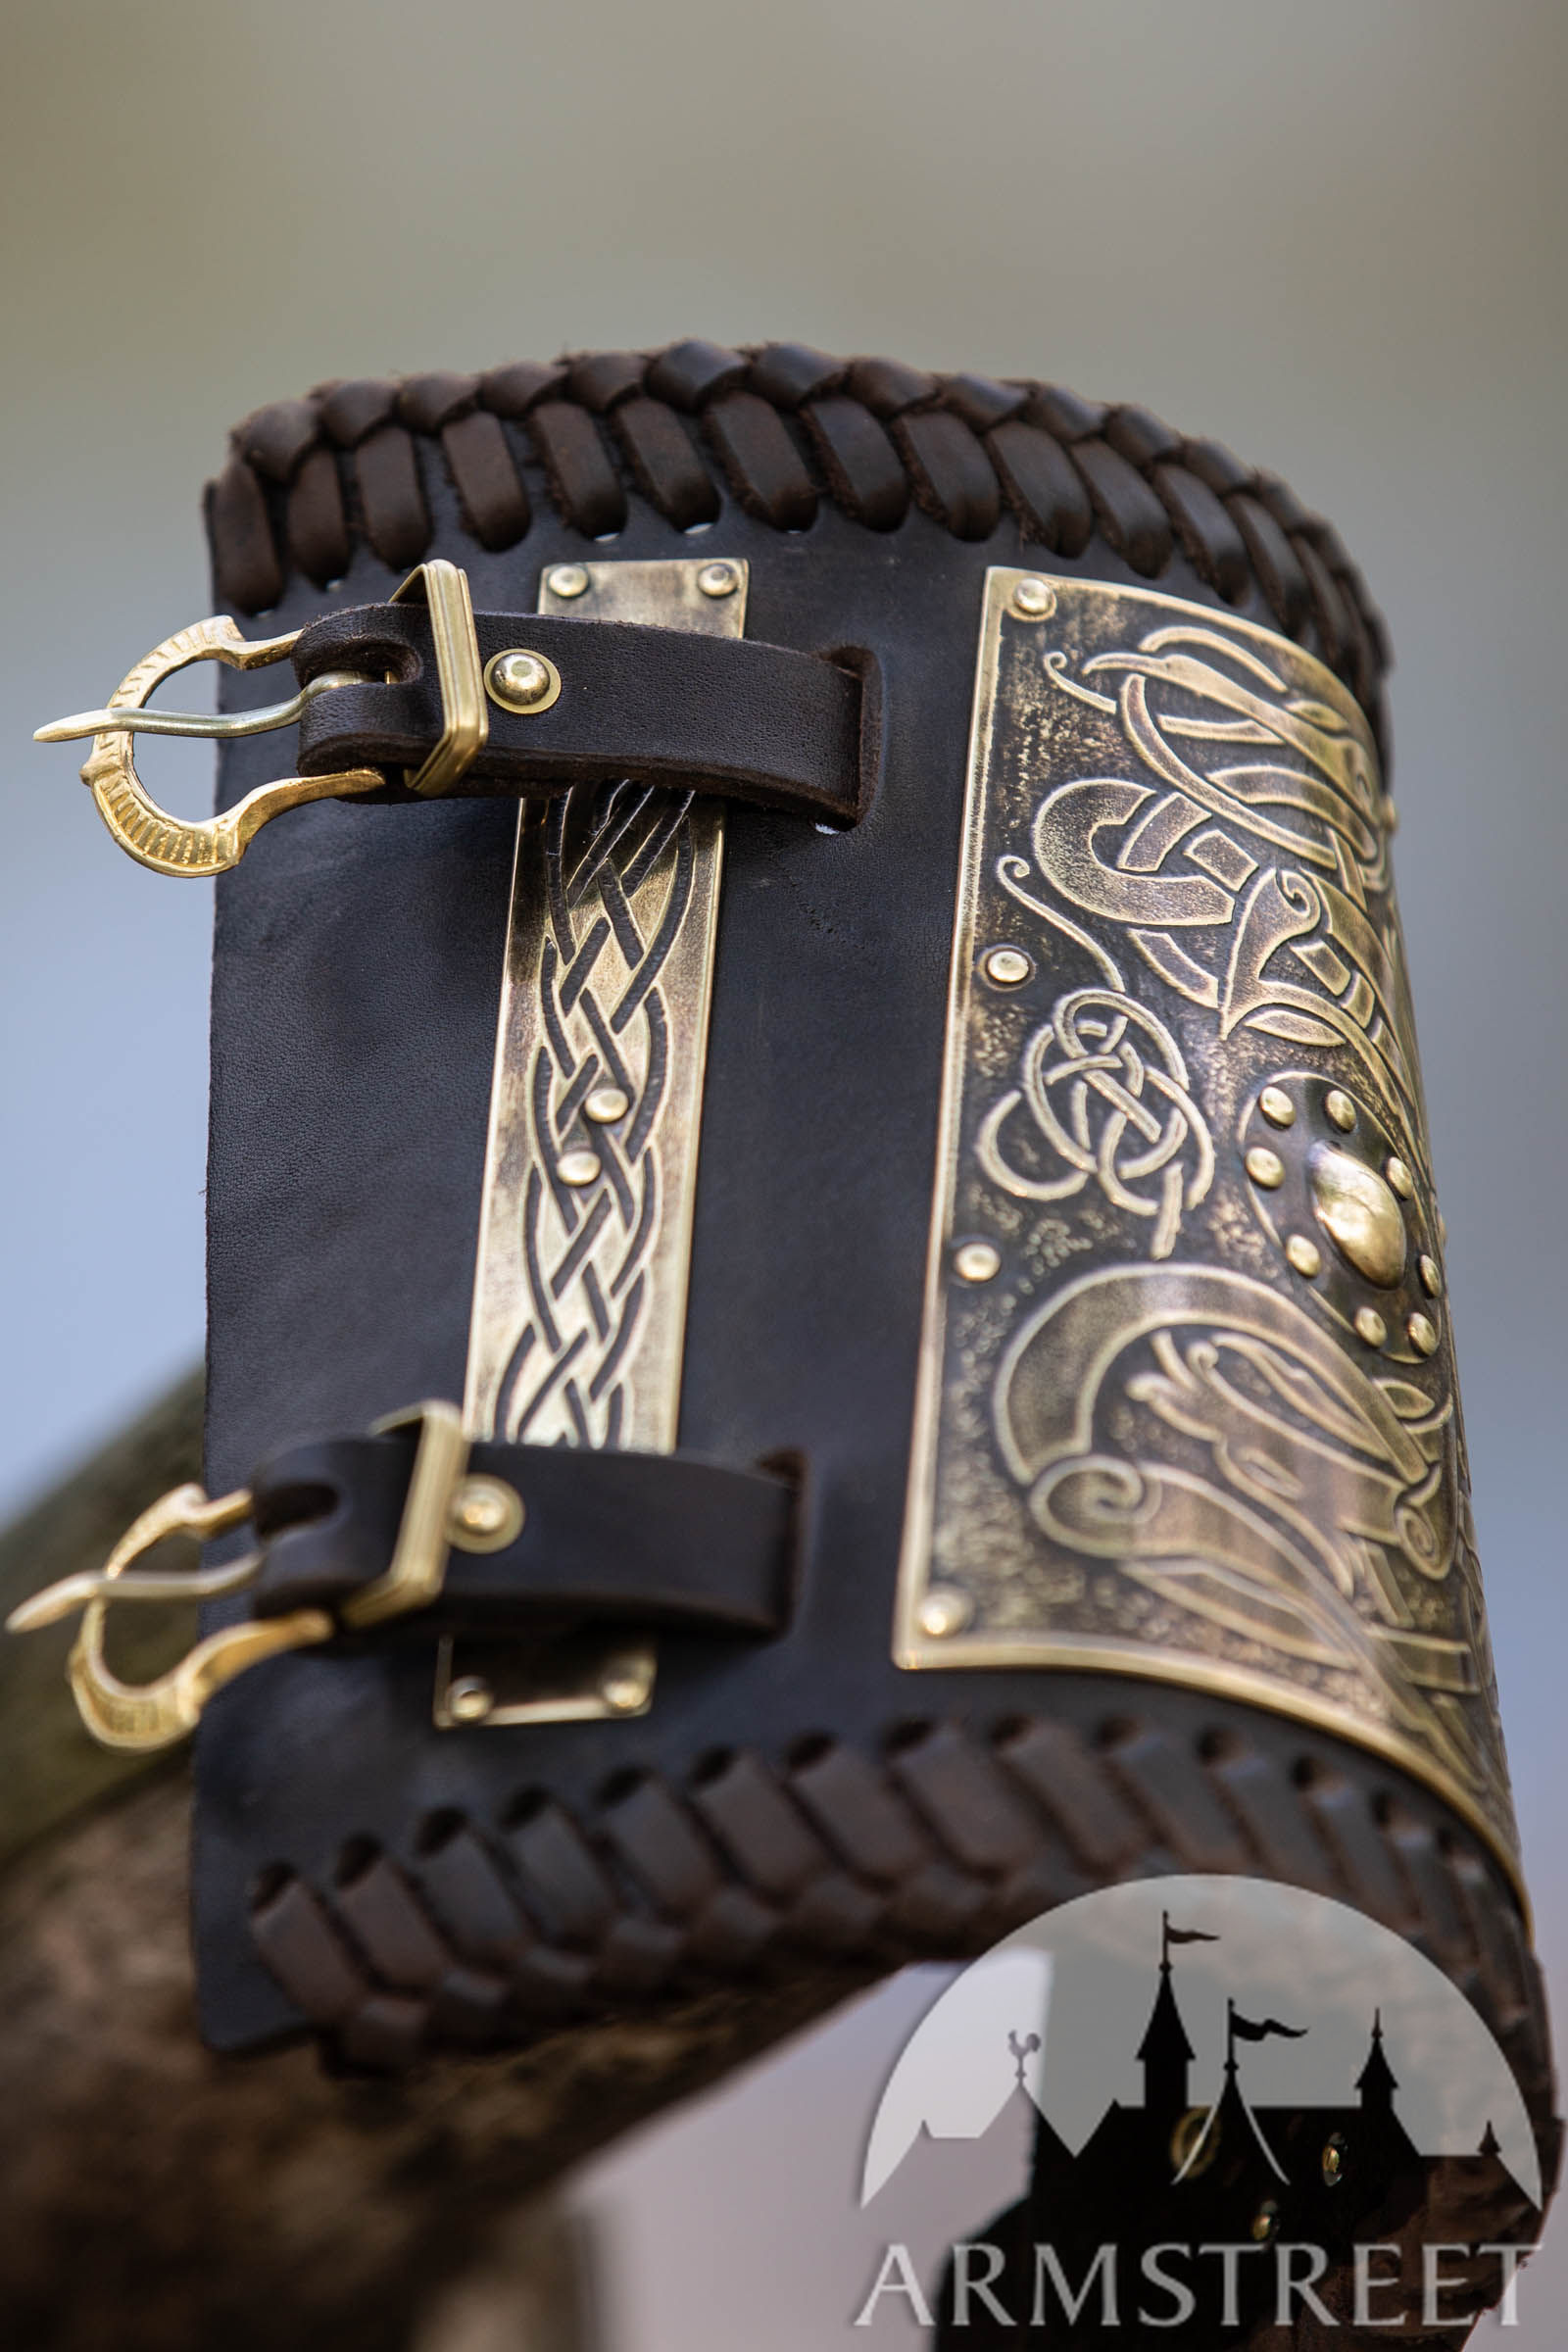 Viking bracers with etched brass accents “Gudrun the Wolfdottir” for sale.  Available in: brown leather, black leather, brass, wolves etching, dragon  etching :: by medieval store ArmStreet